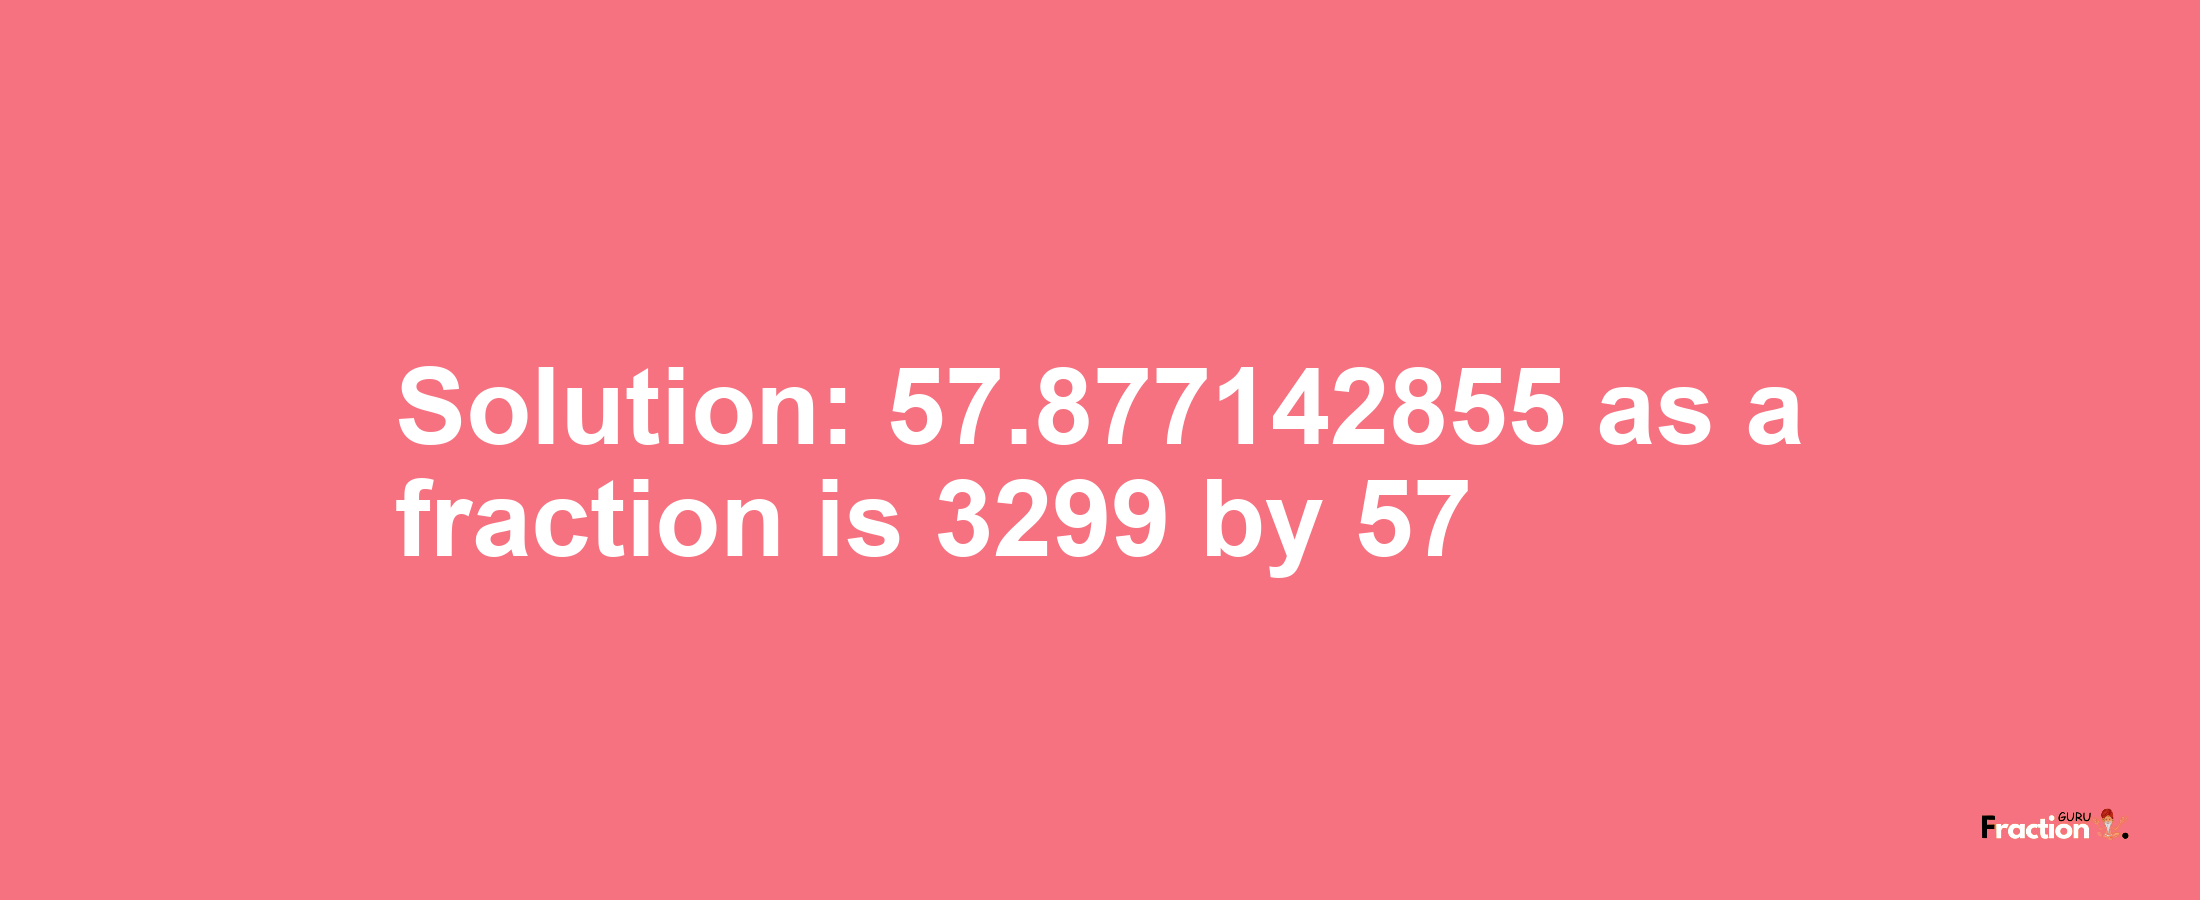 Solution:57.877142855 as a fraction is 3299/57